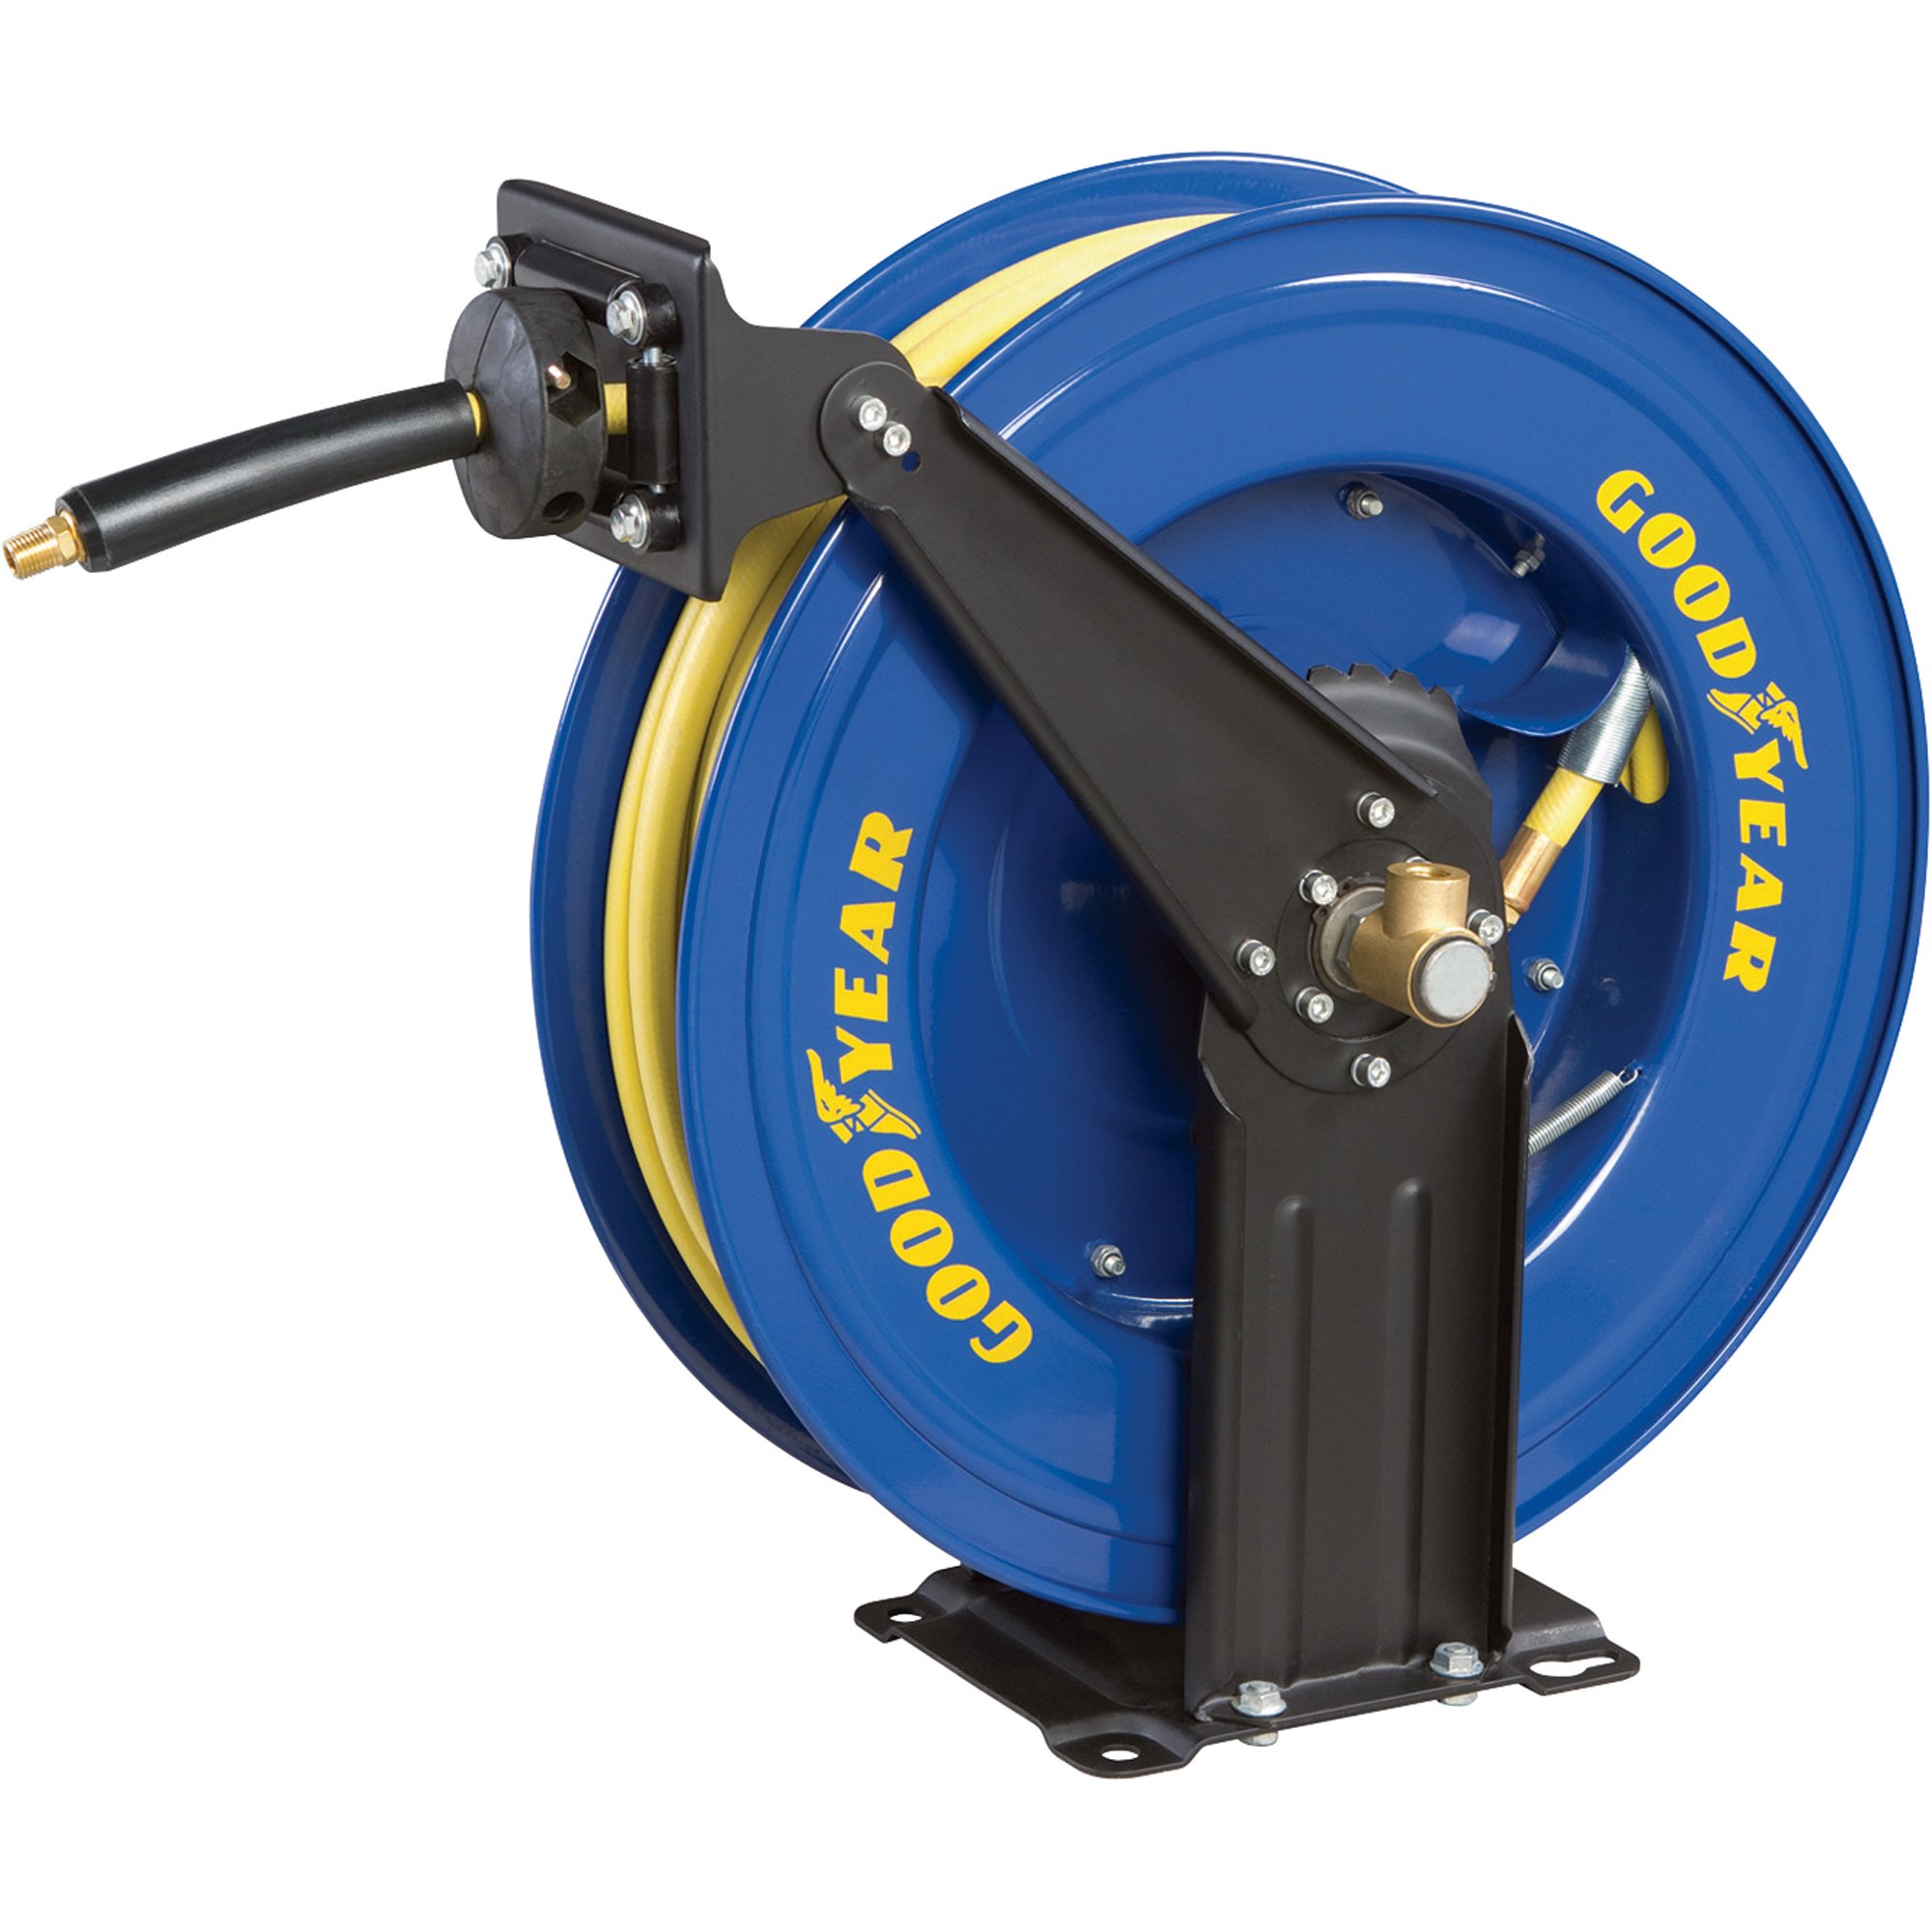 Auto Retracted Air Hose Reel Manufacturers & Suppliers - China